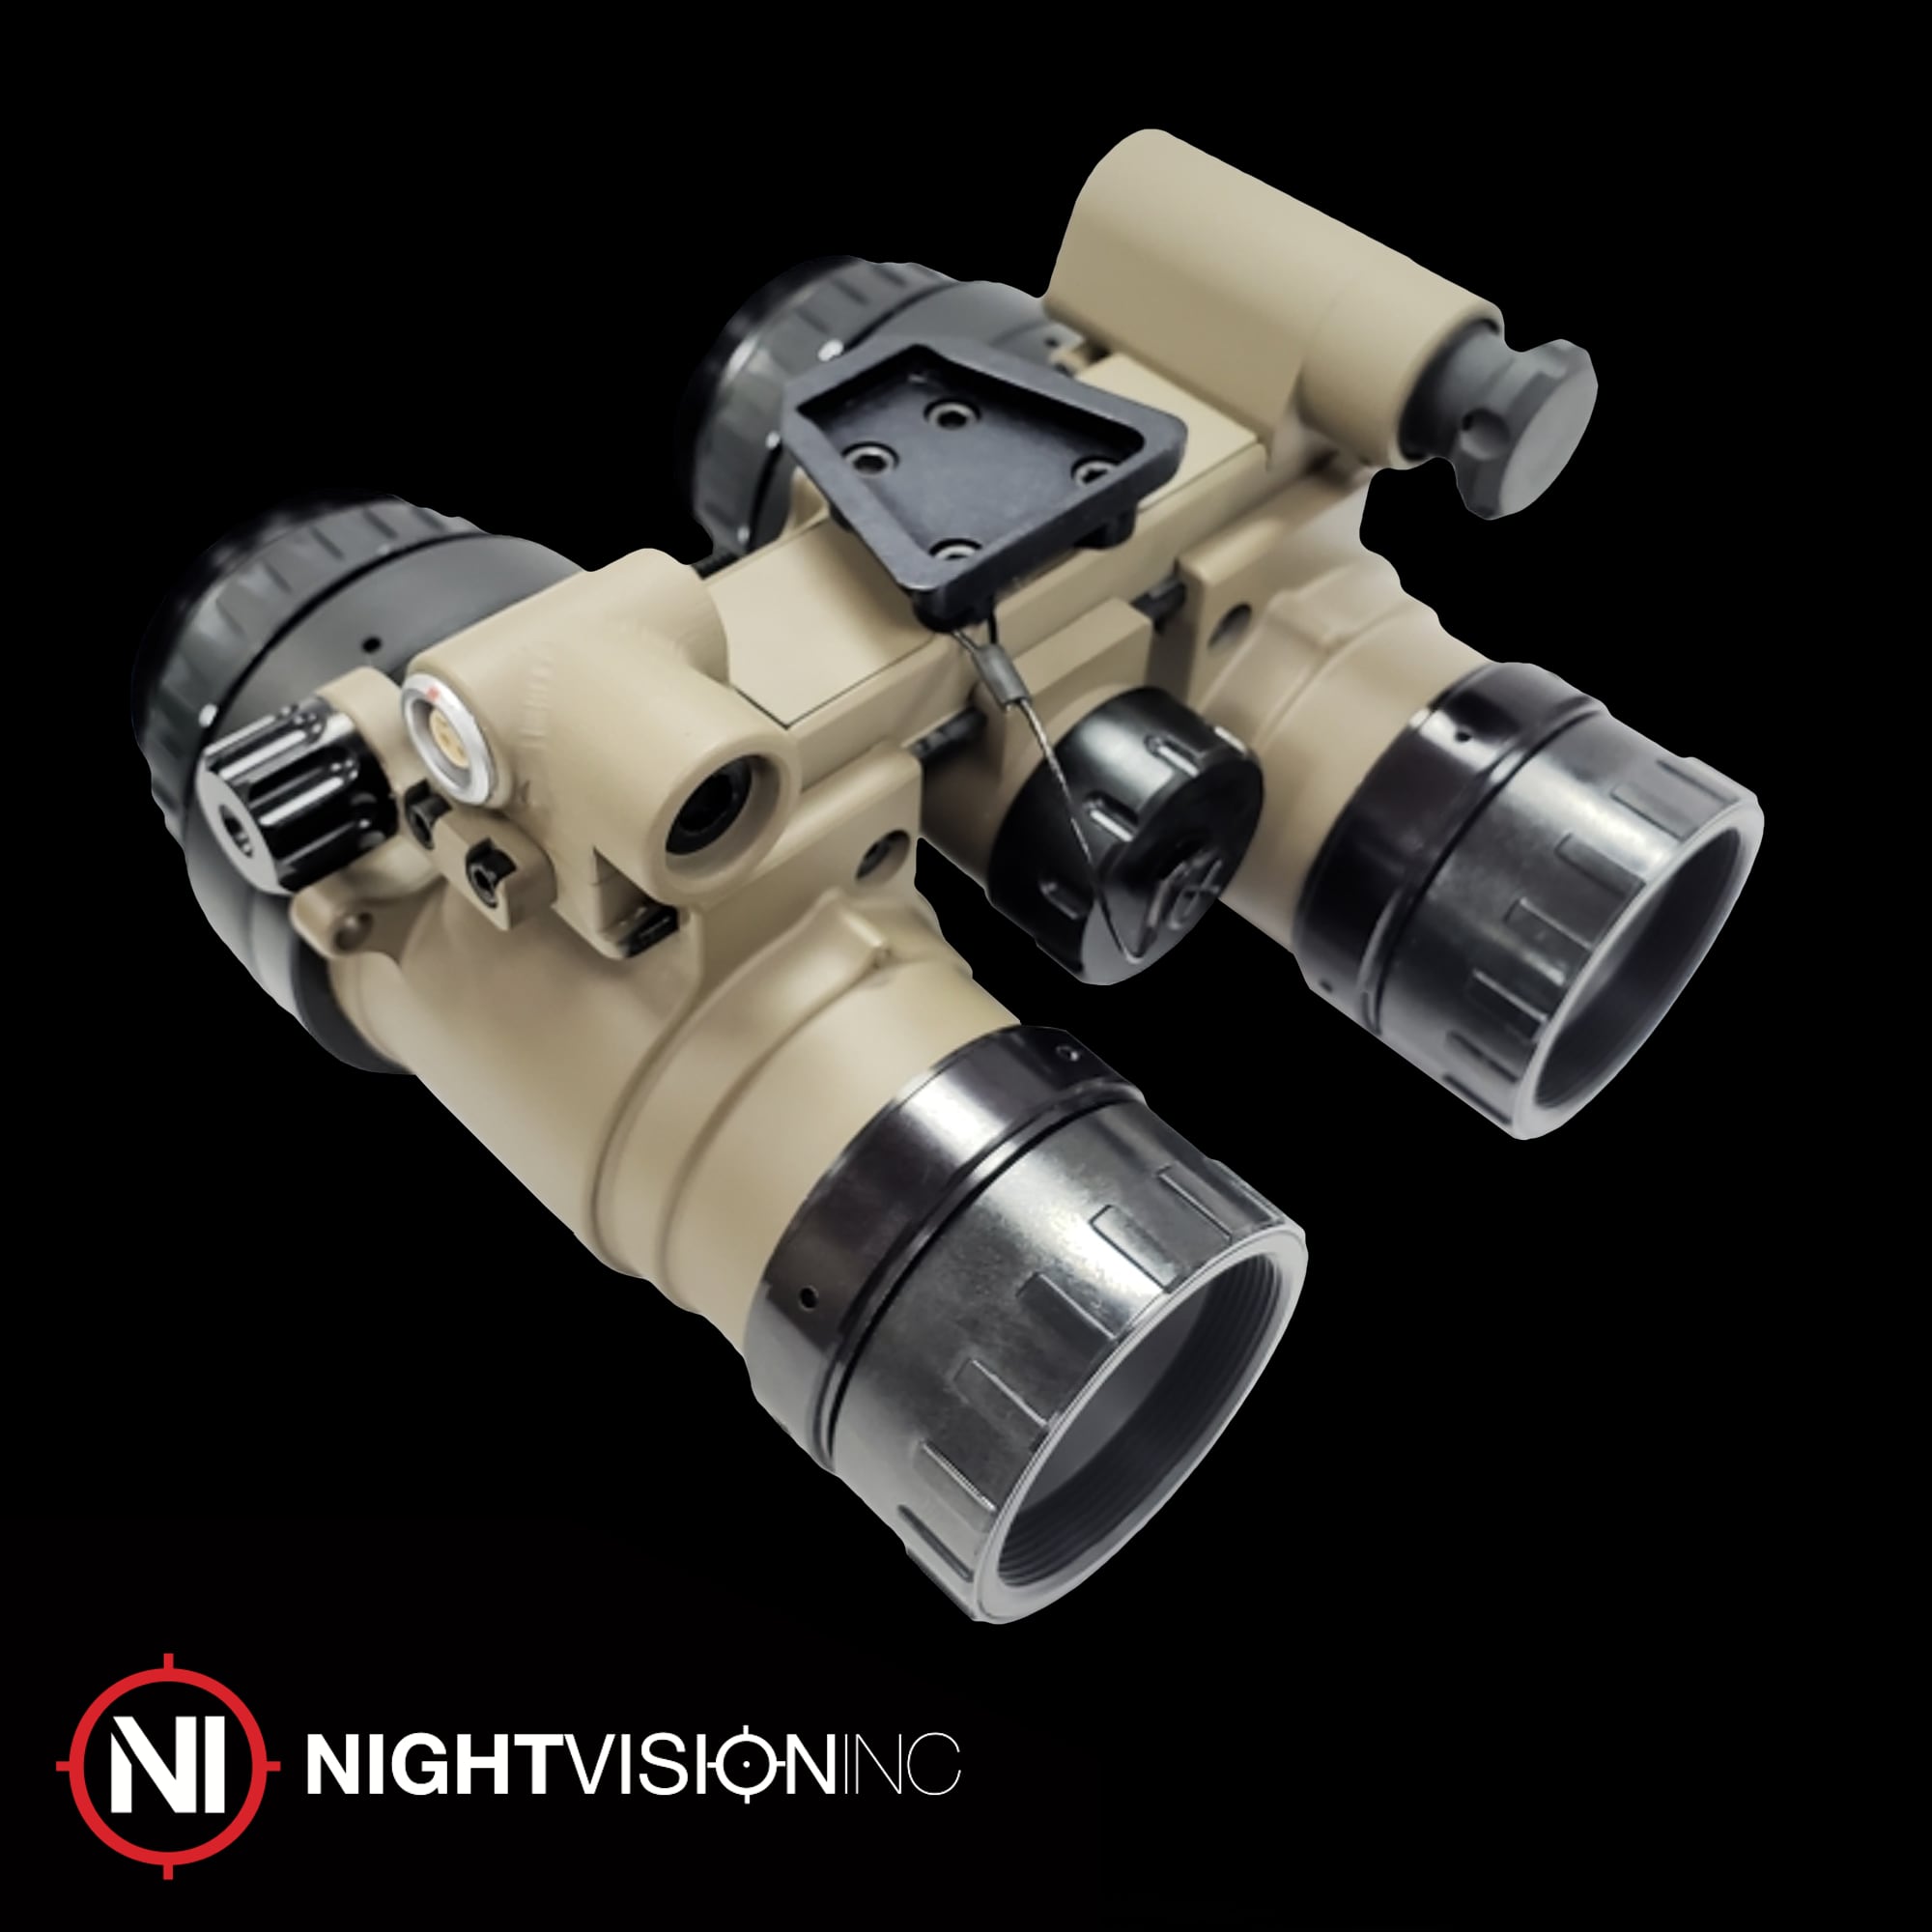 RVNG Housing | AB Rugged Night Vision Goggles for Sale